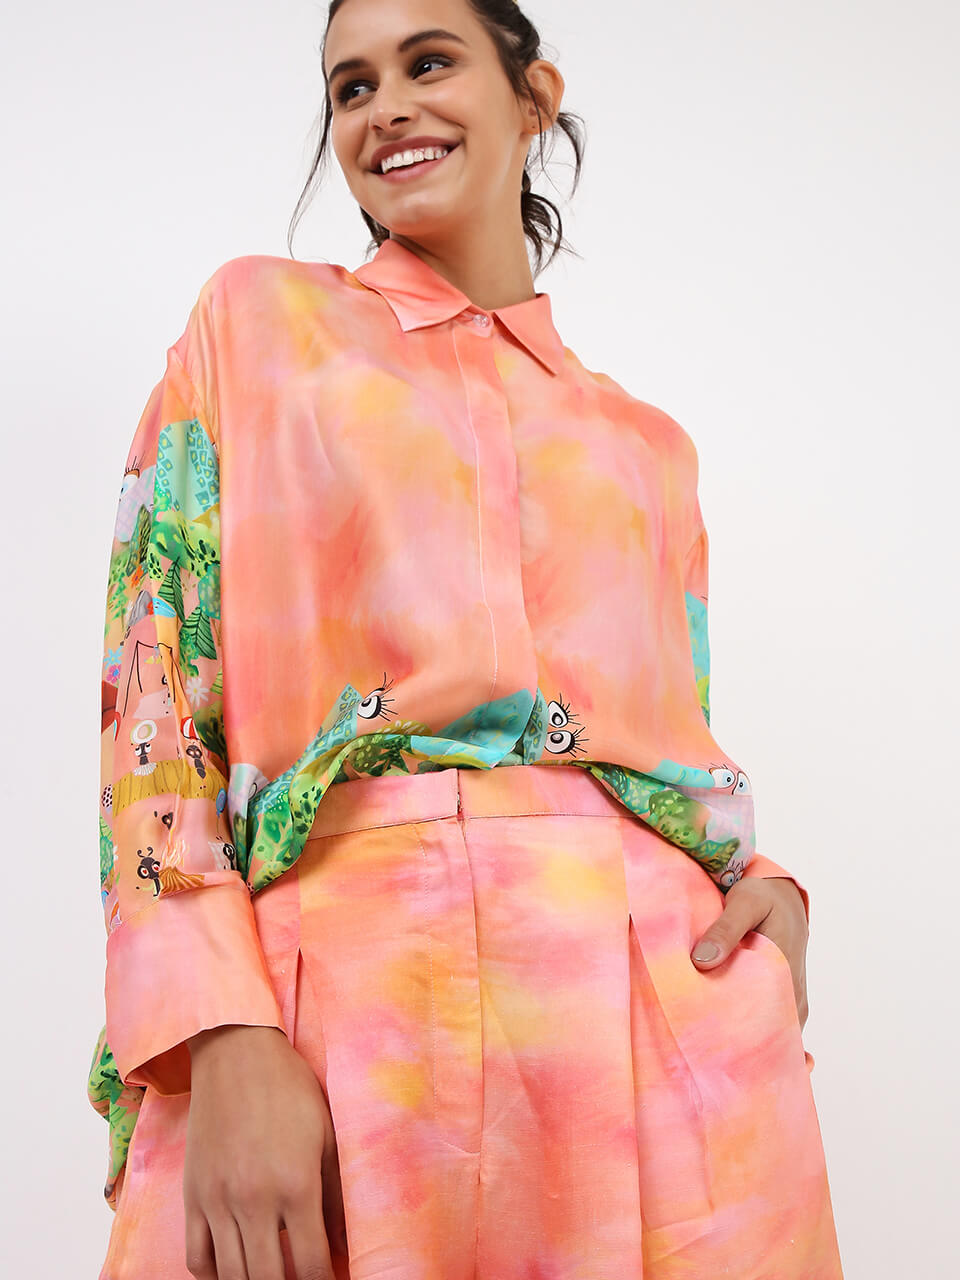 A Happy Little Camper Printed Shirt Co-ord Set